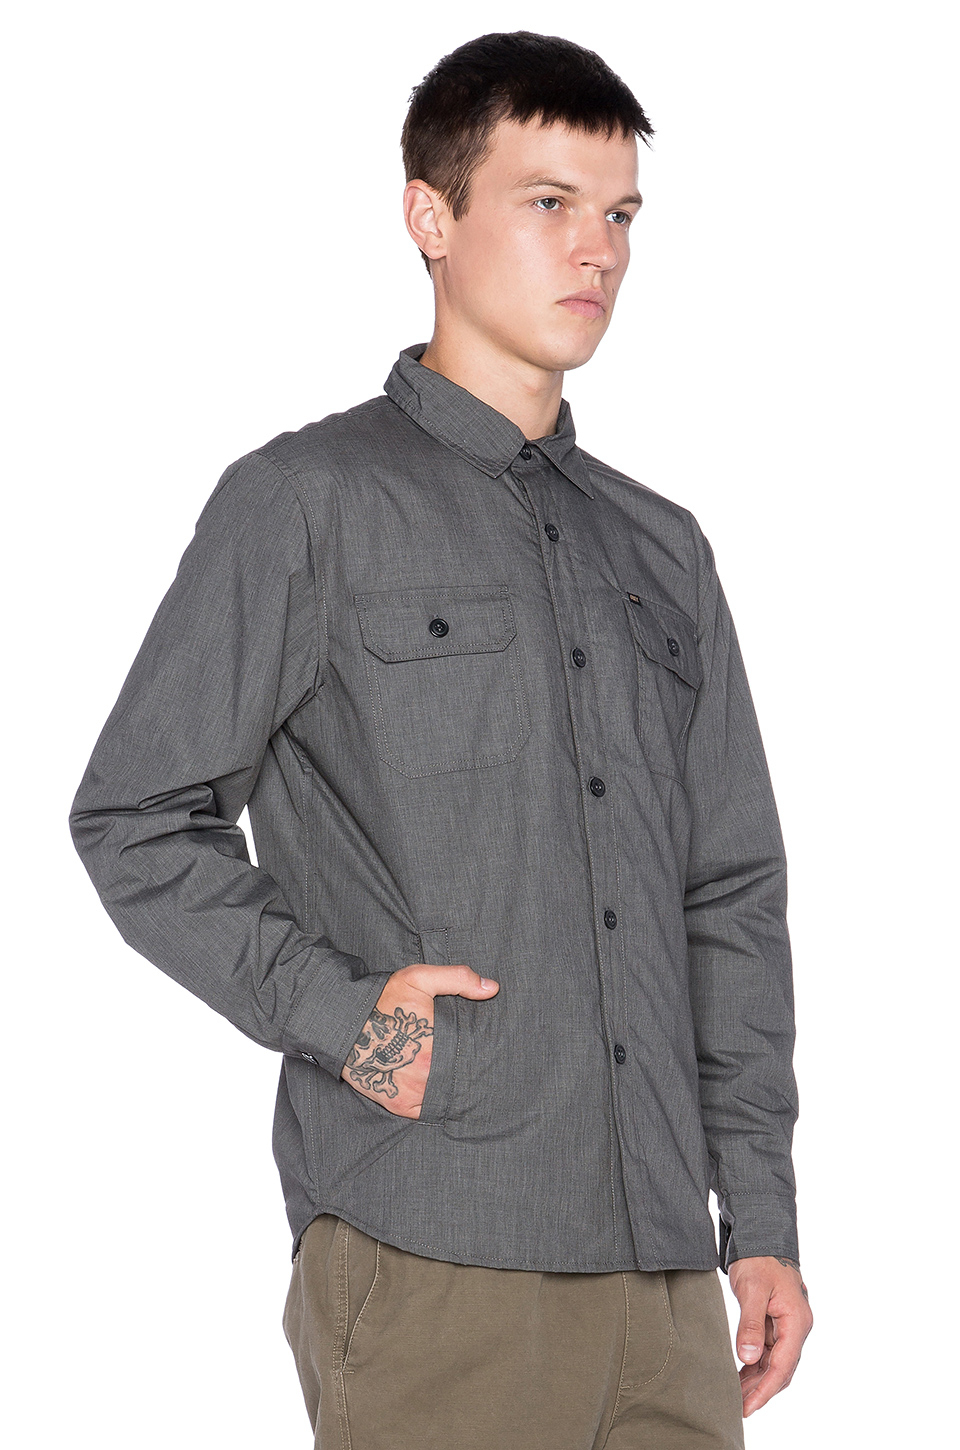 Lyst - Obey Barstow Jacket in Gray for Men